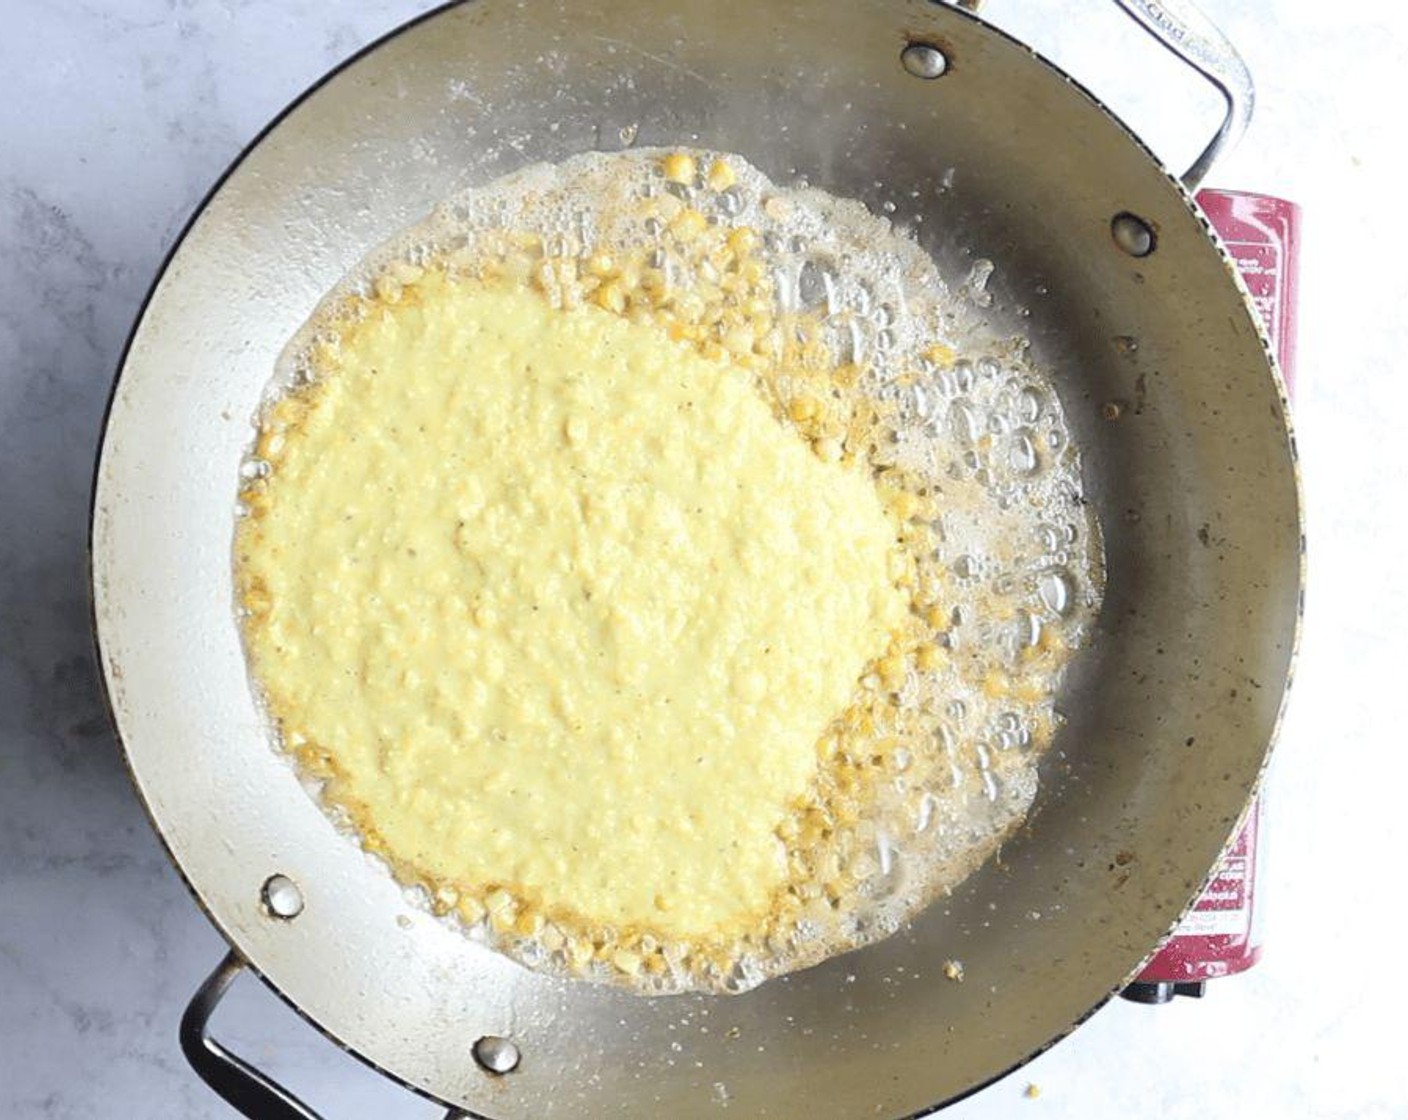 step 5 Heat the same skillet over high heat. Add Unsalted Butter (1/3 cup) and let melt. Add reserved 1/4 cup corn and cook until tender, 1 to 2 minutes. Add the corn purée and cook for 30 seconds to heat and combine the flavors.